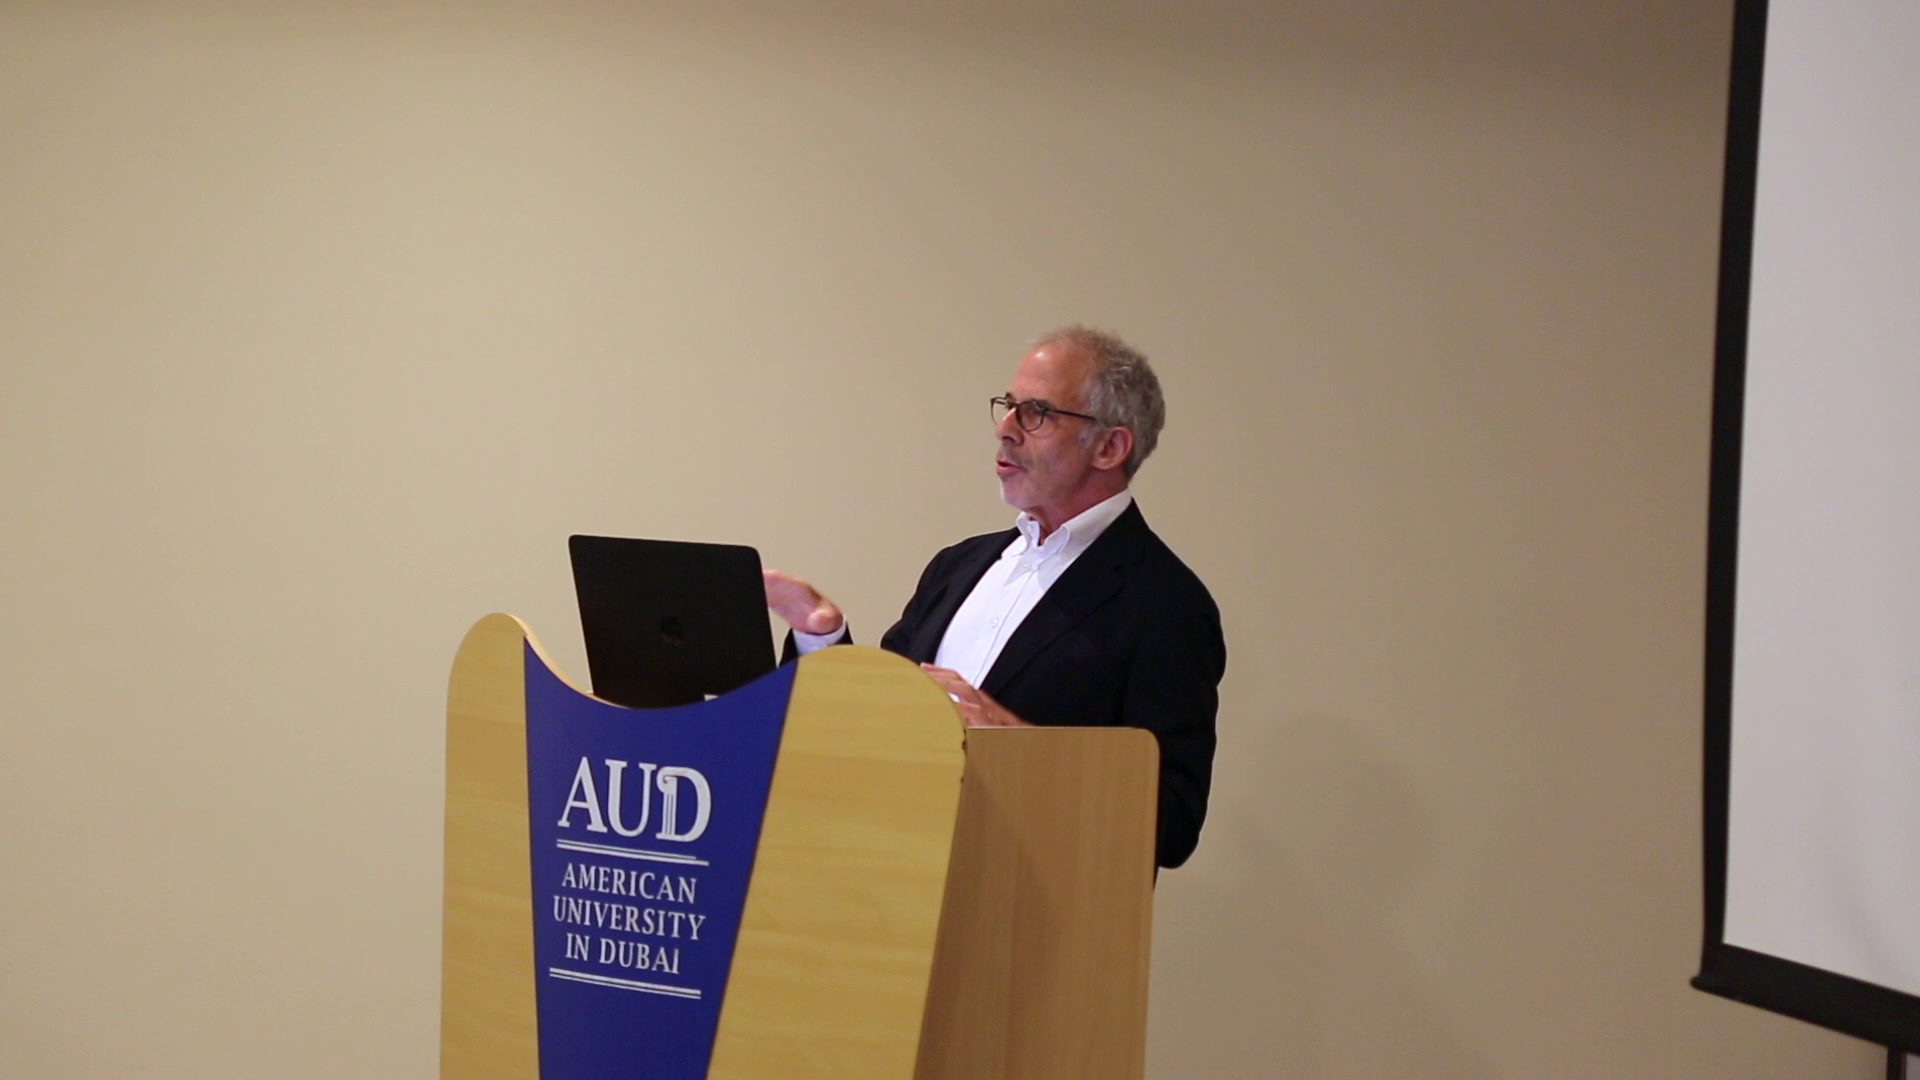 AUD Hosts Executive Session Series